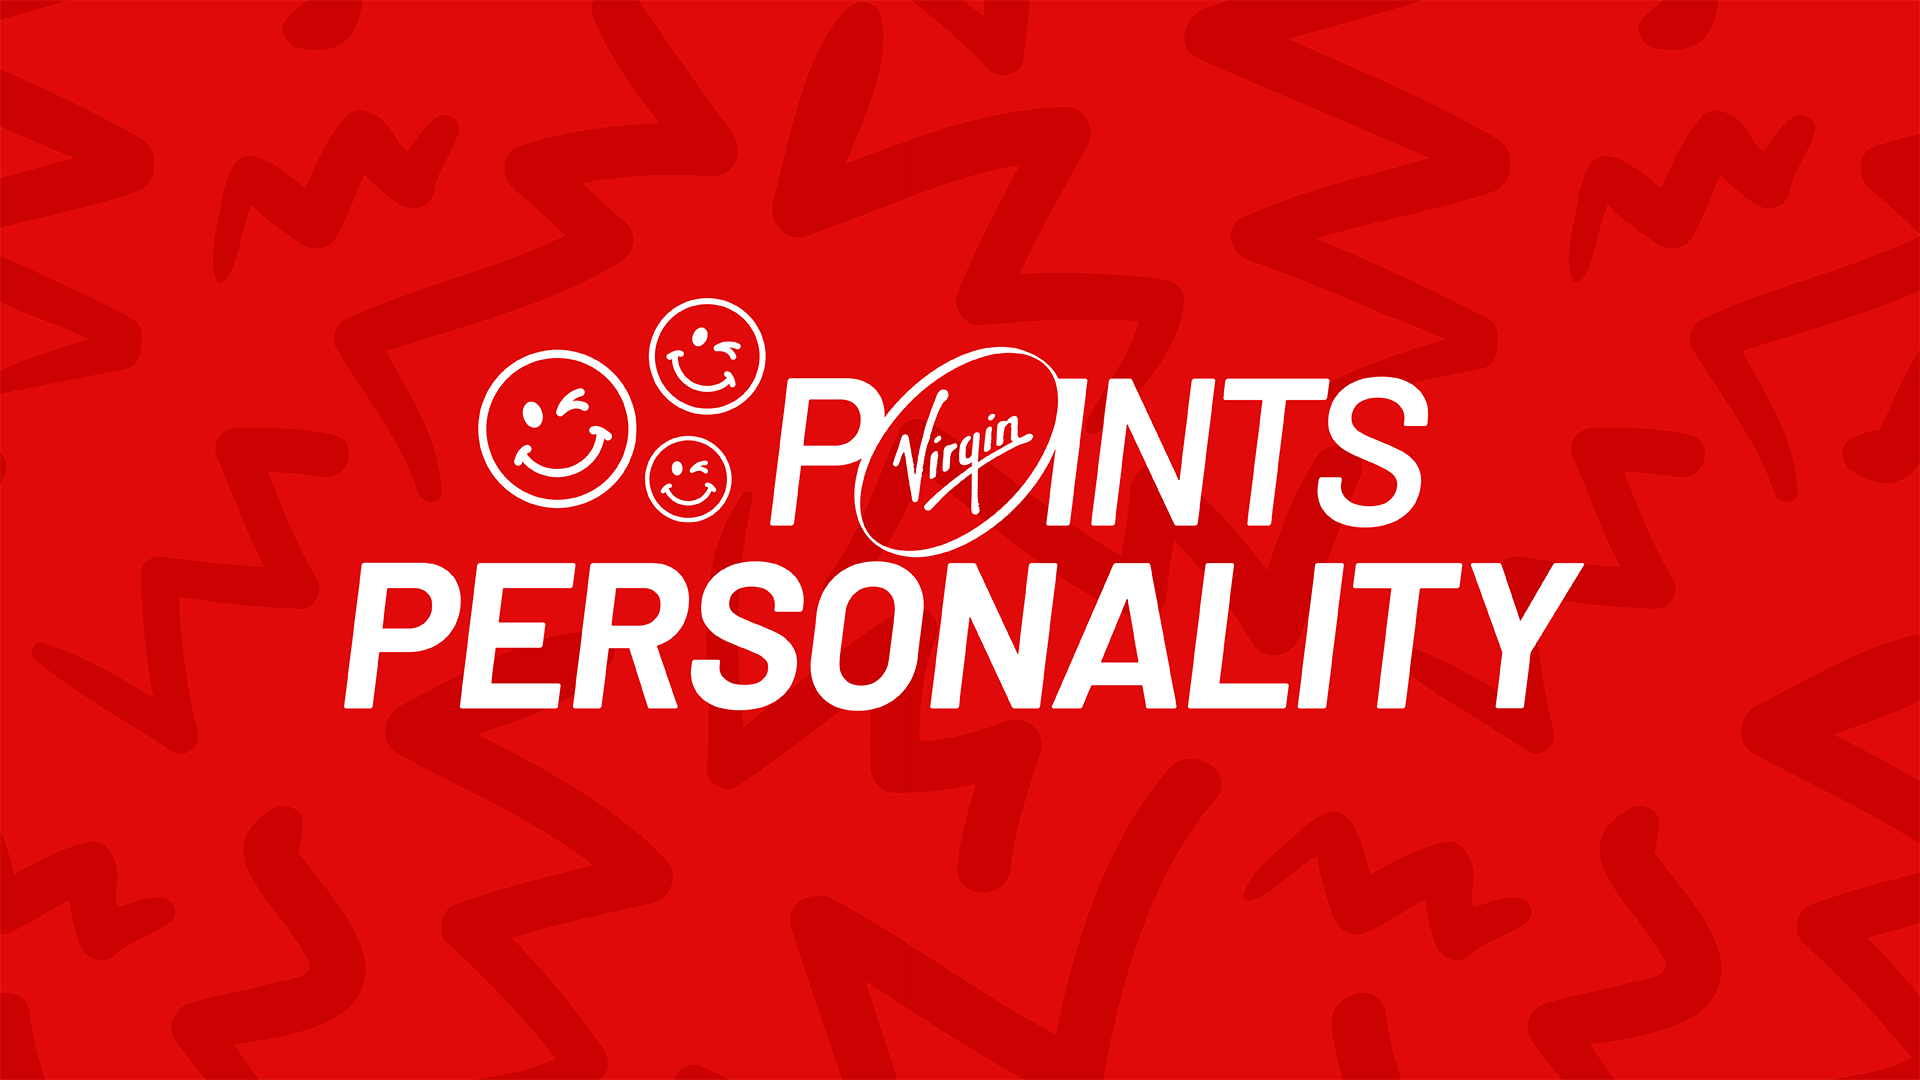 What's your Virgin Points Personality?